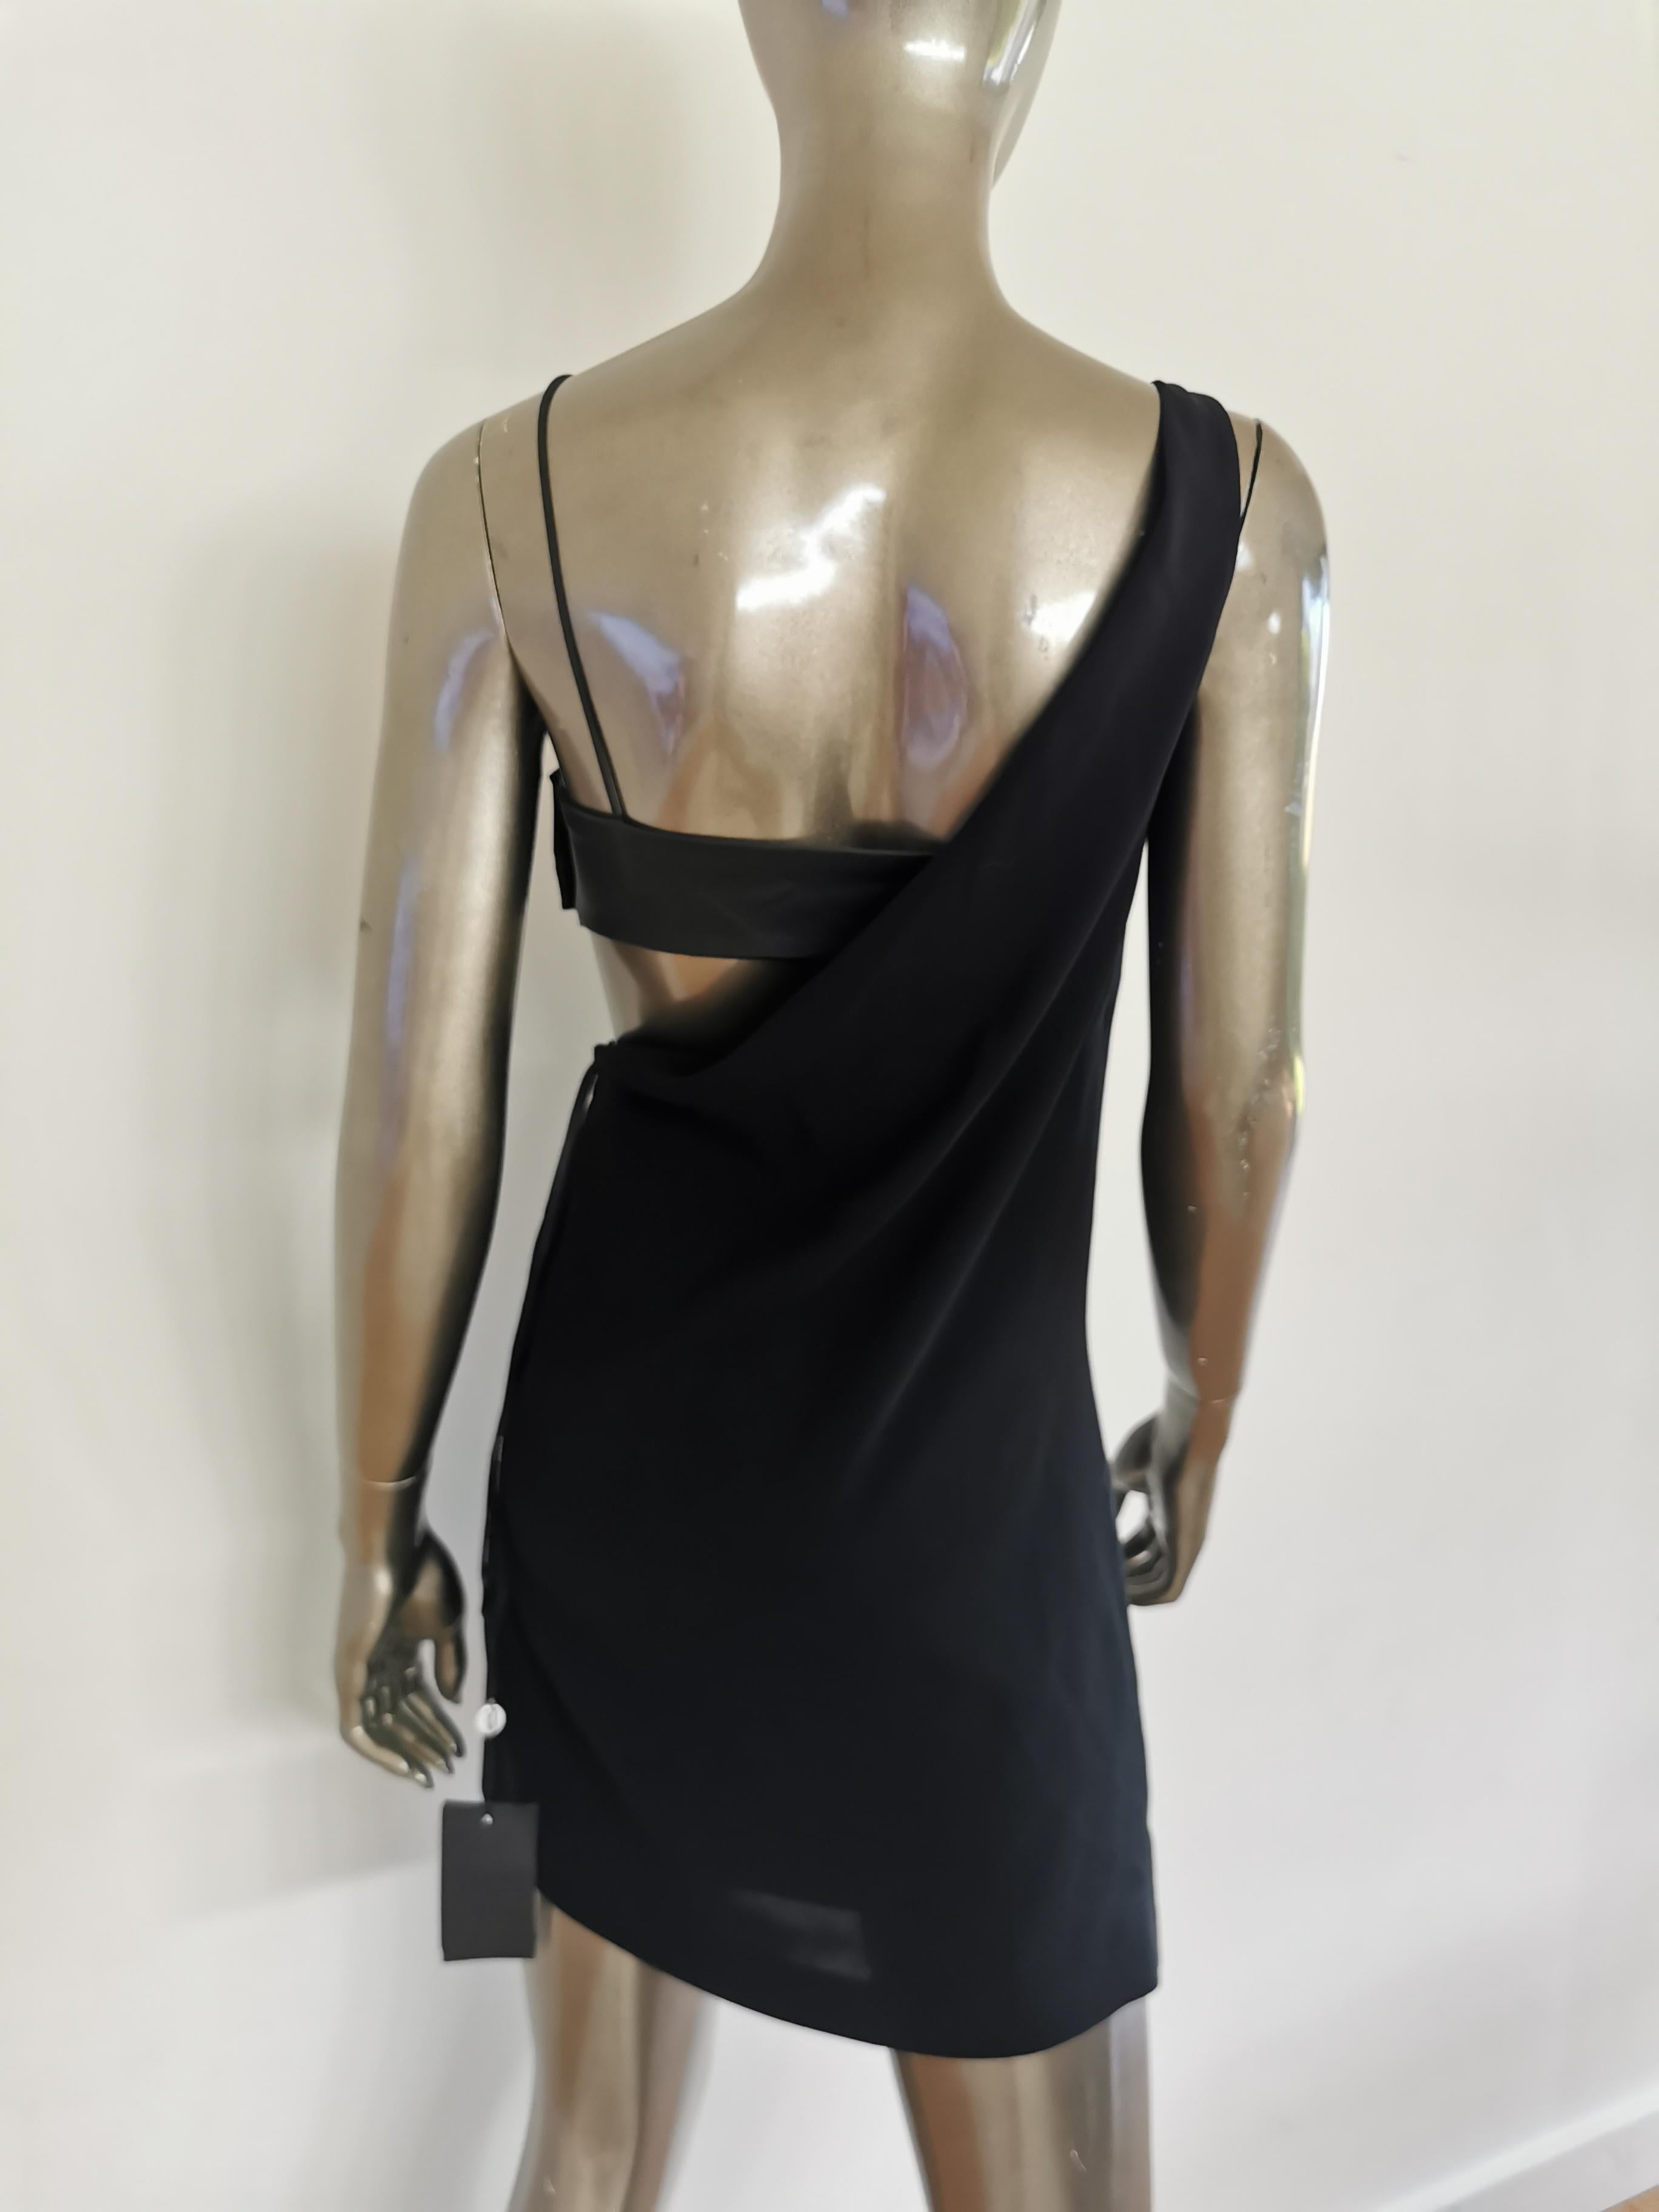 Versus by ANTHONY VACCARELLO Versace Black Lion Assymetrical Cocktail Dress For Sale 4